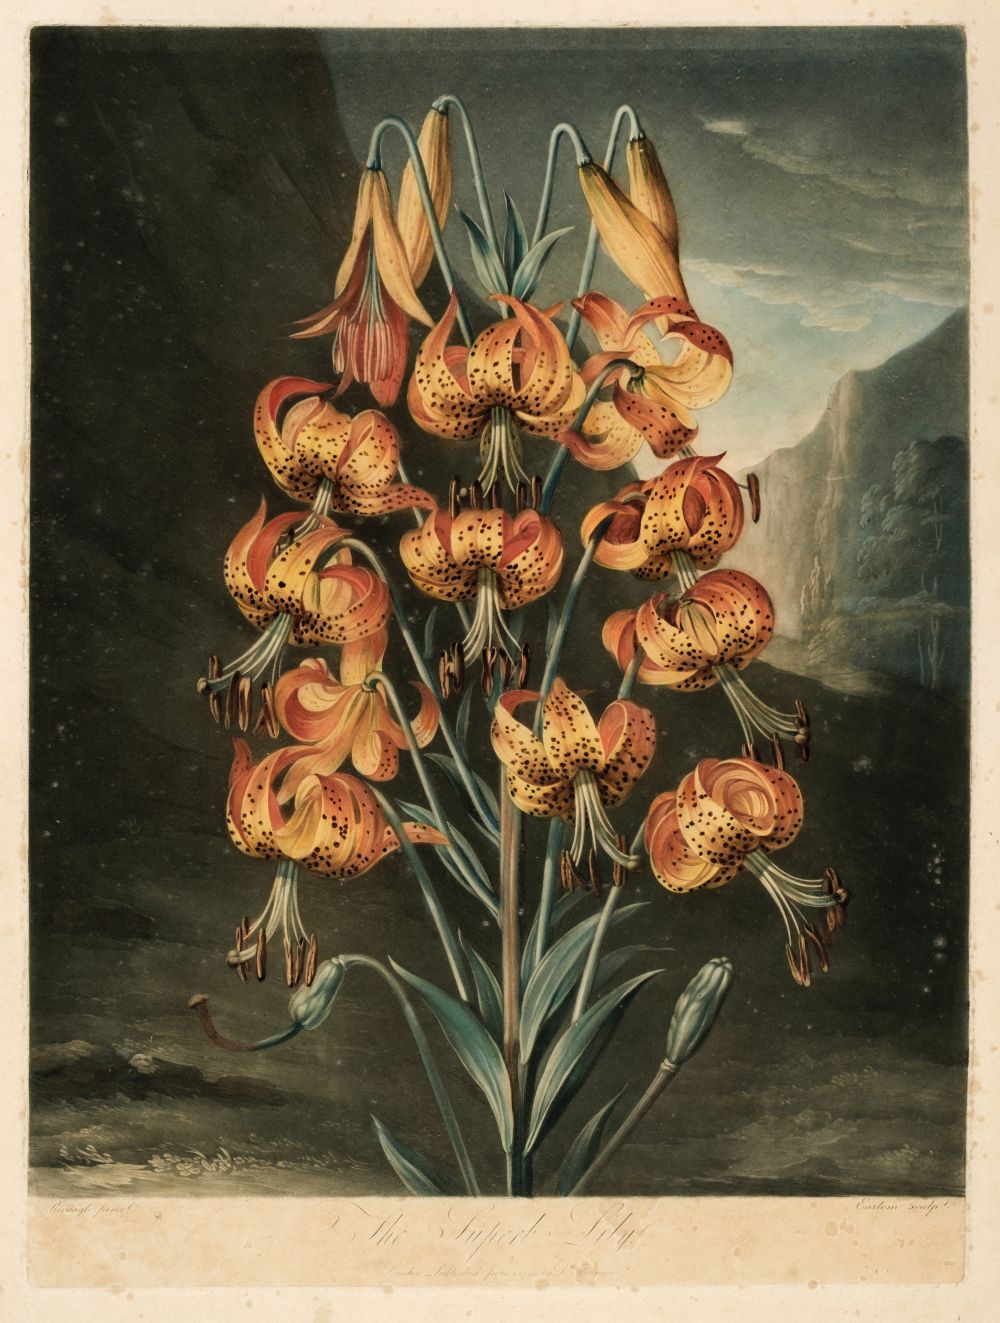 Thornton (Dr Robert). The Superb Lily, June 1st. 1799